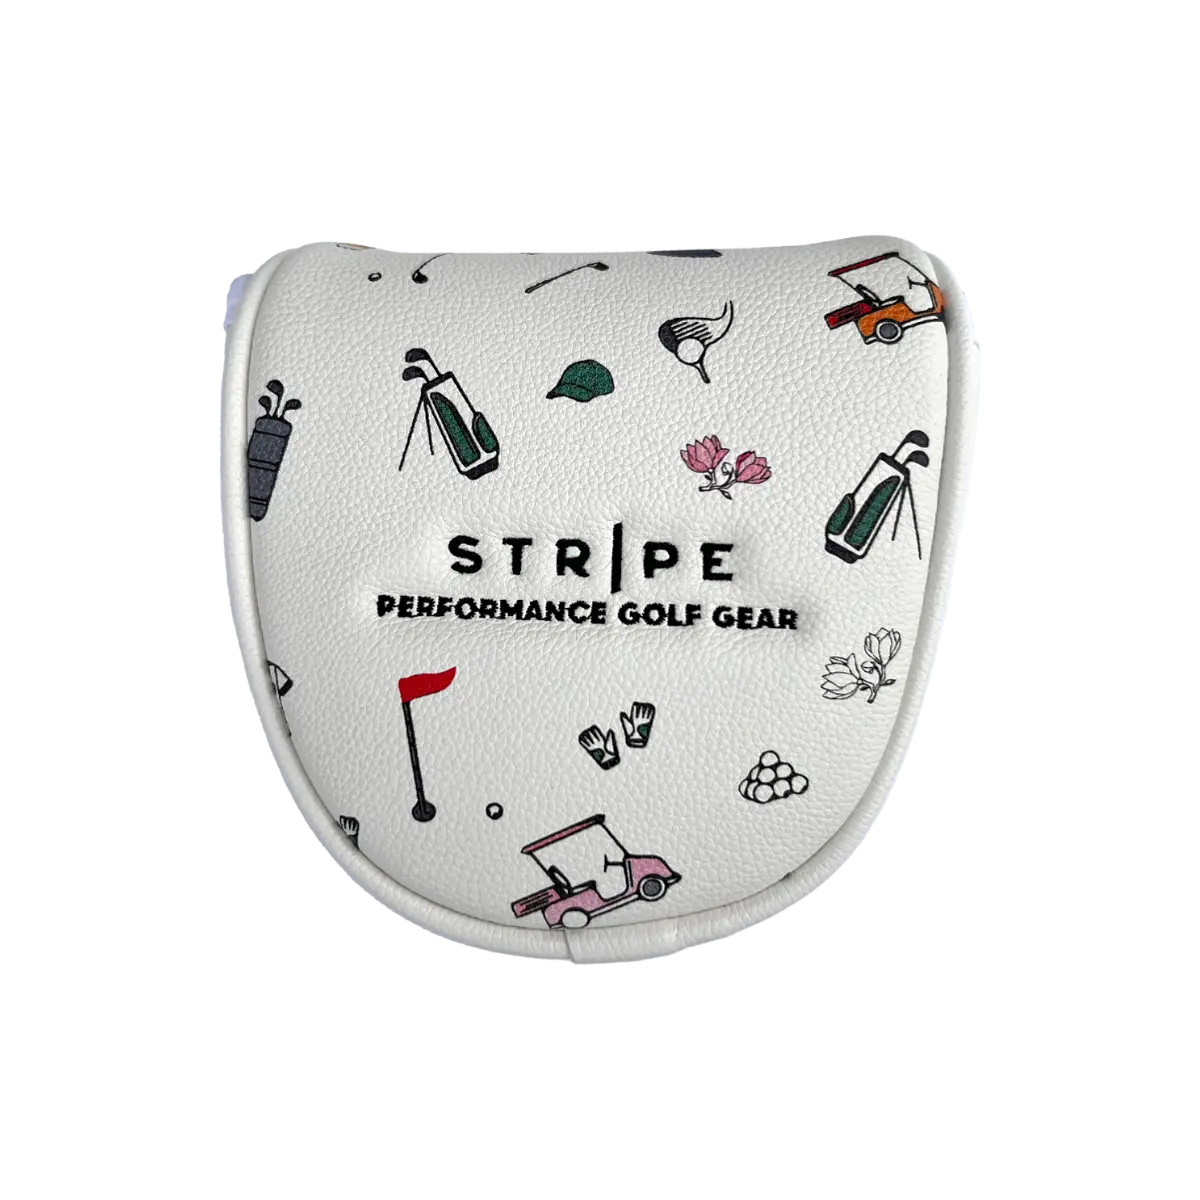 Stripe golf mallet putter headcover front